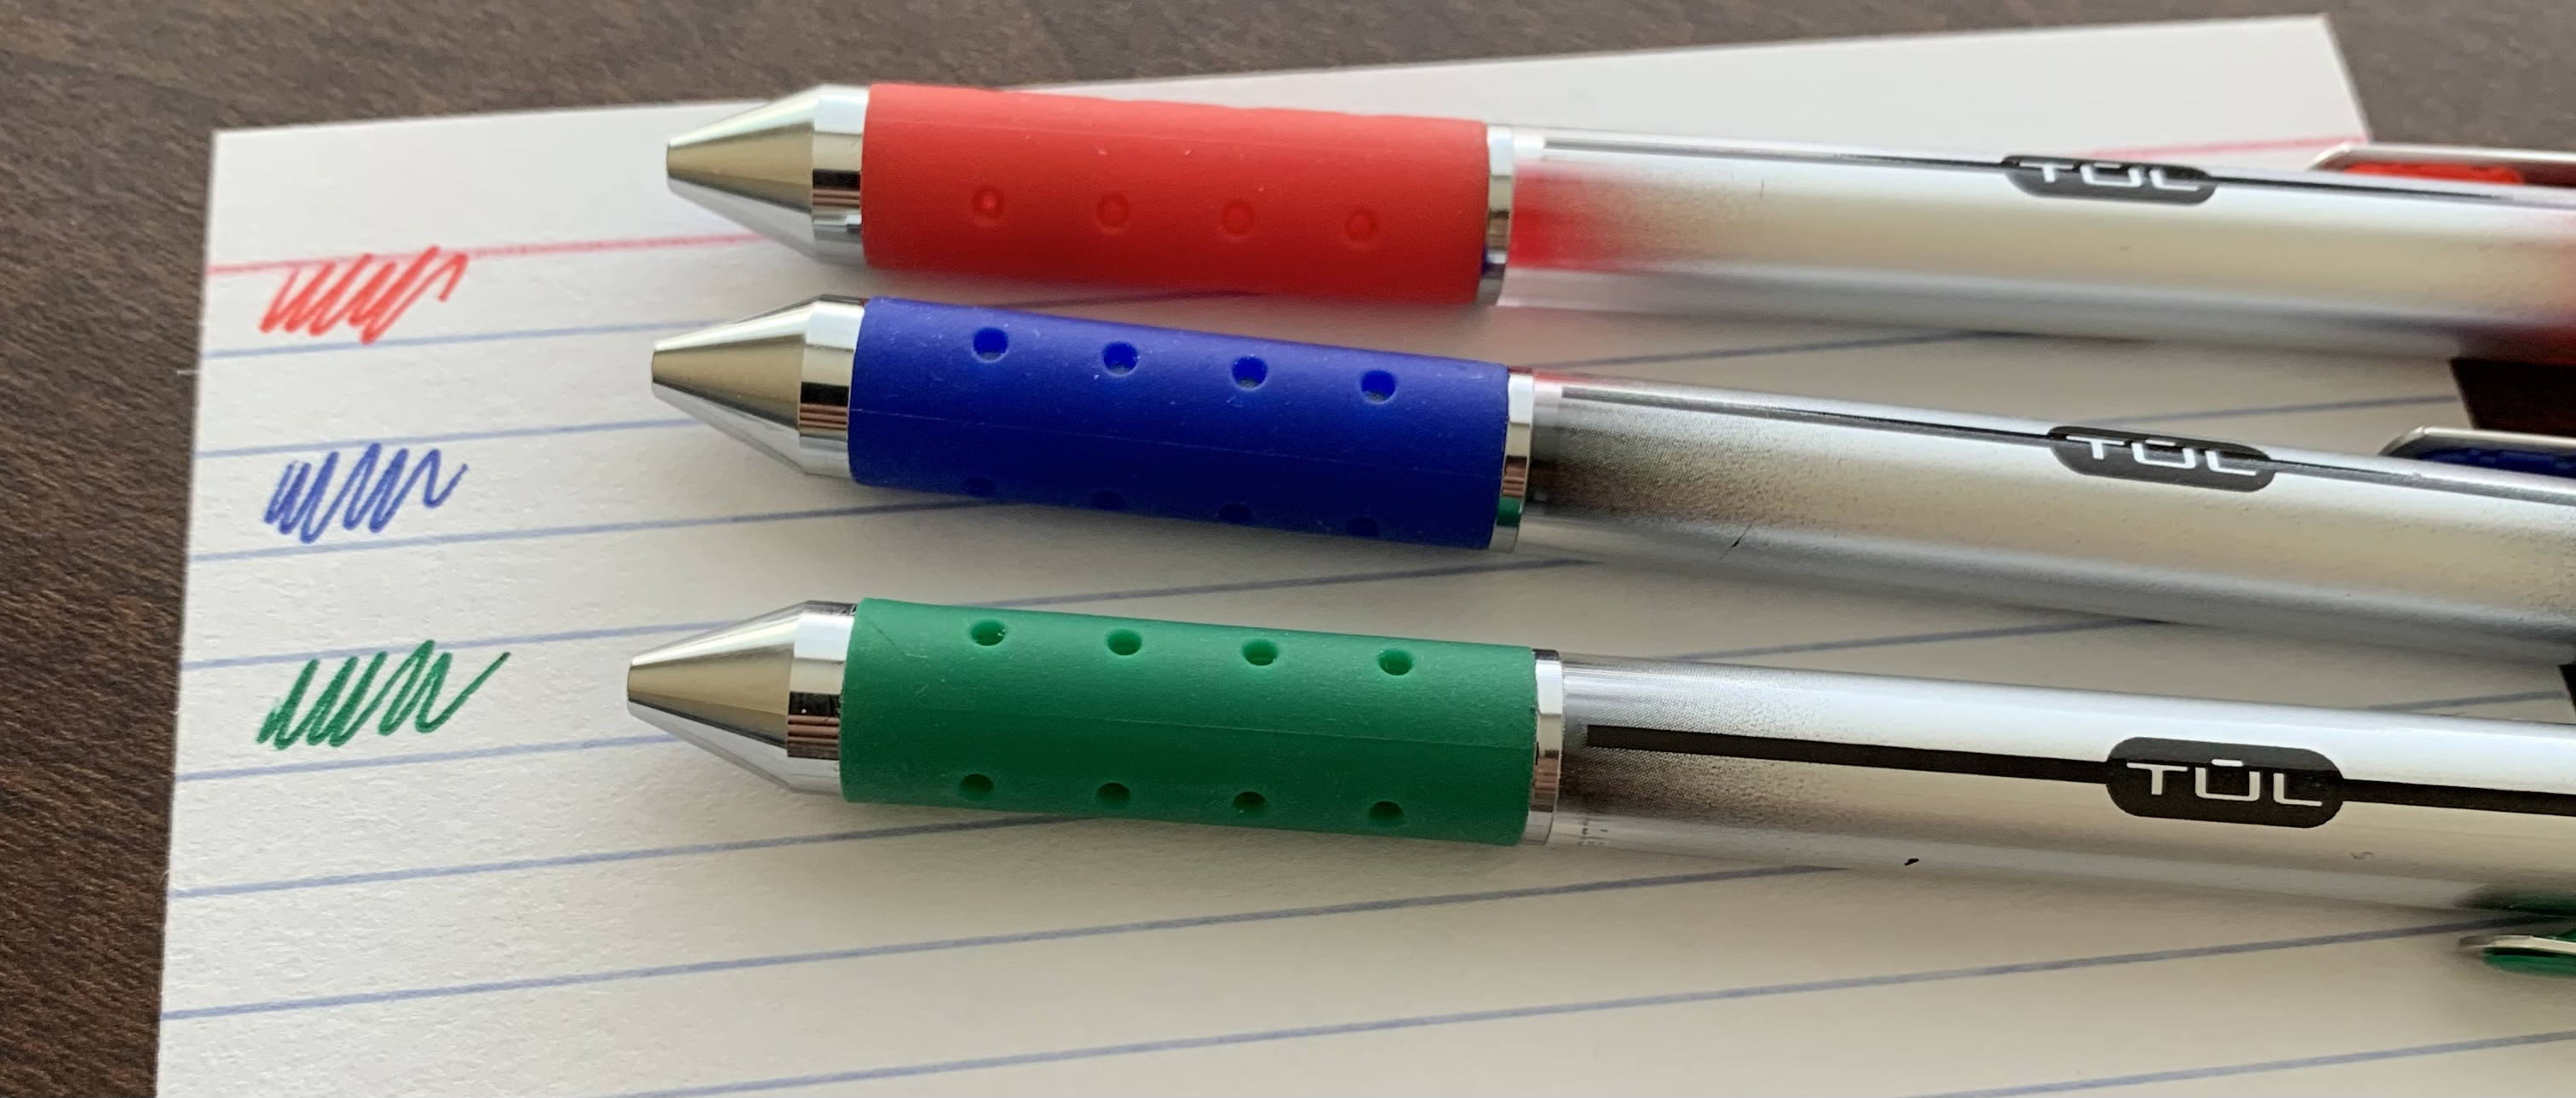 red, blue, and green tul gel pens resting on an index card